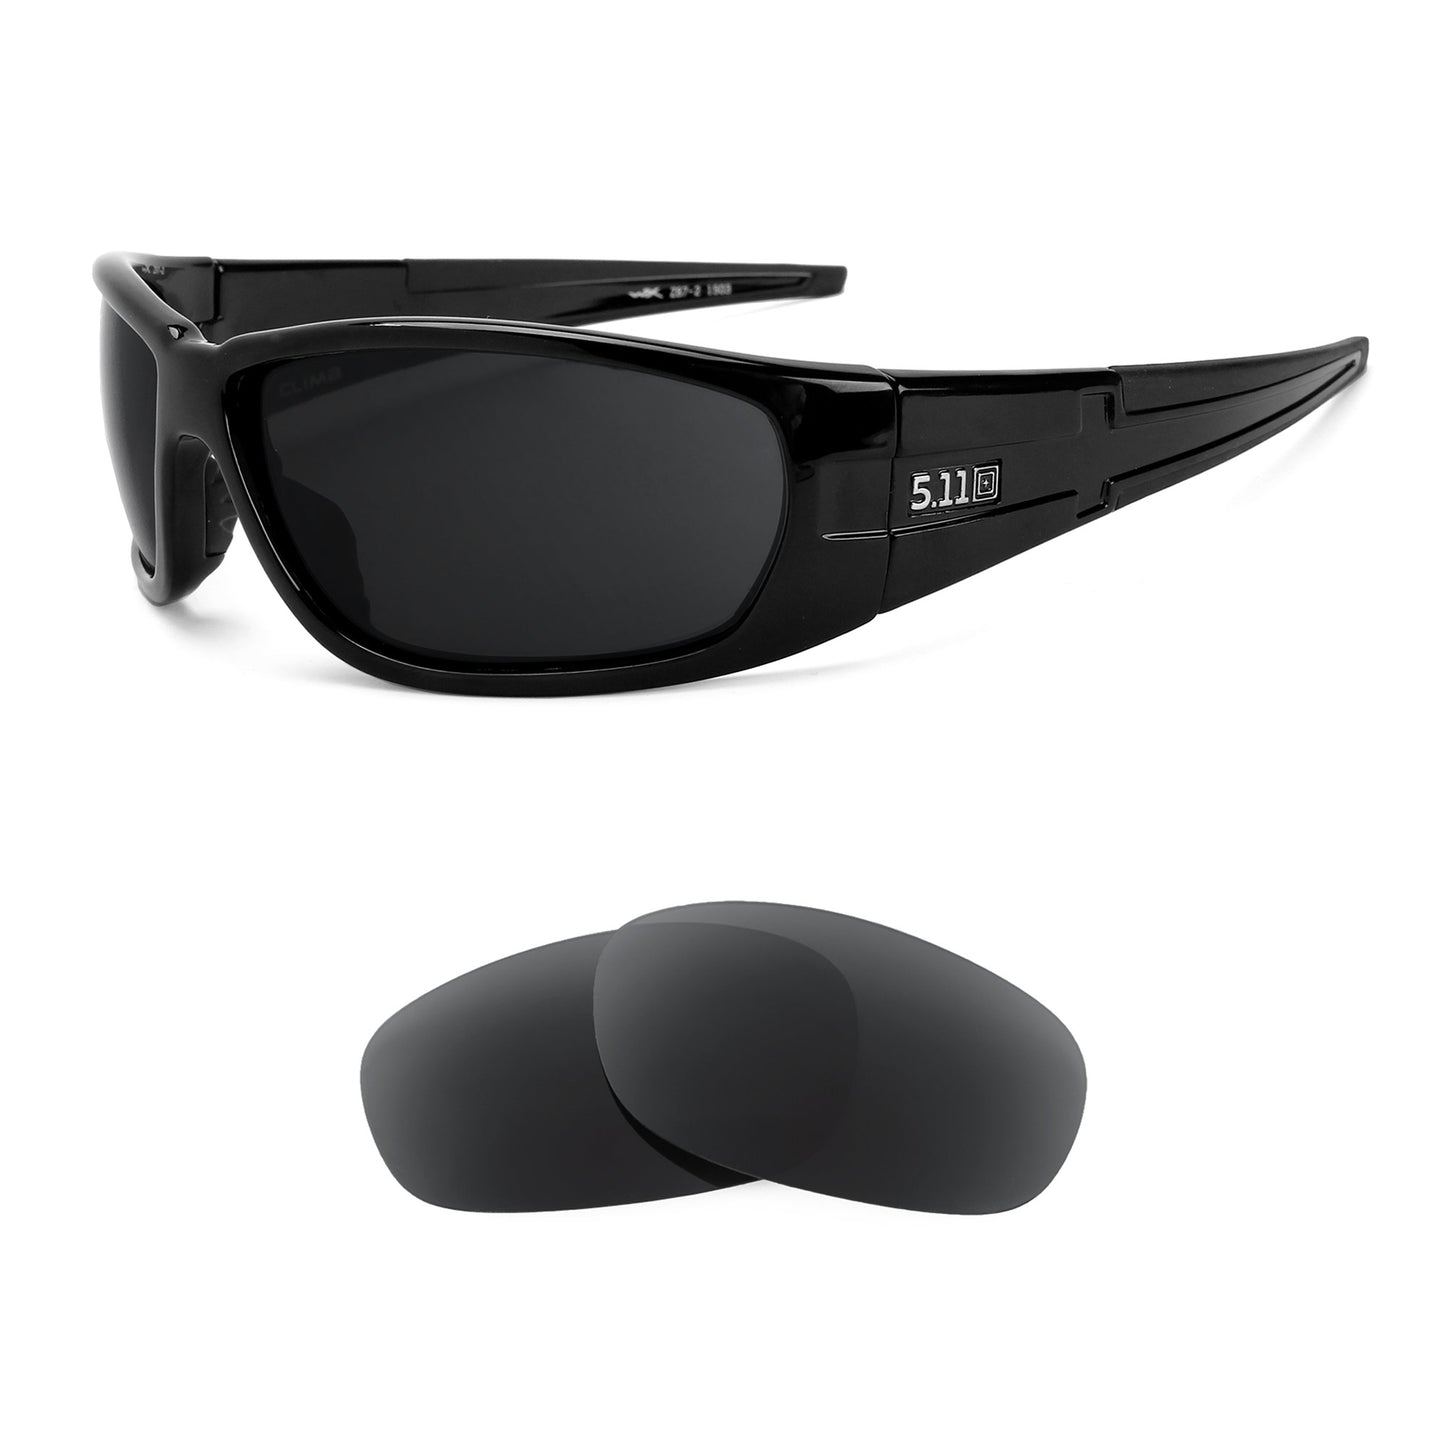 5.11 Tactical Climb sunglasses with replacement lenses